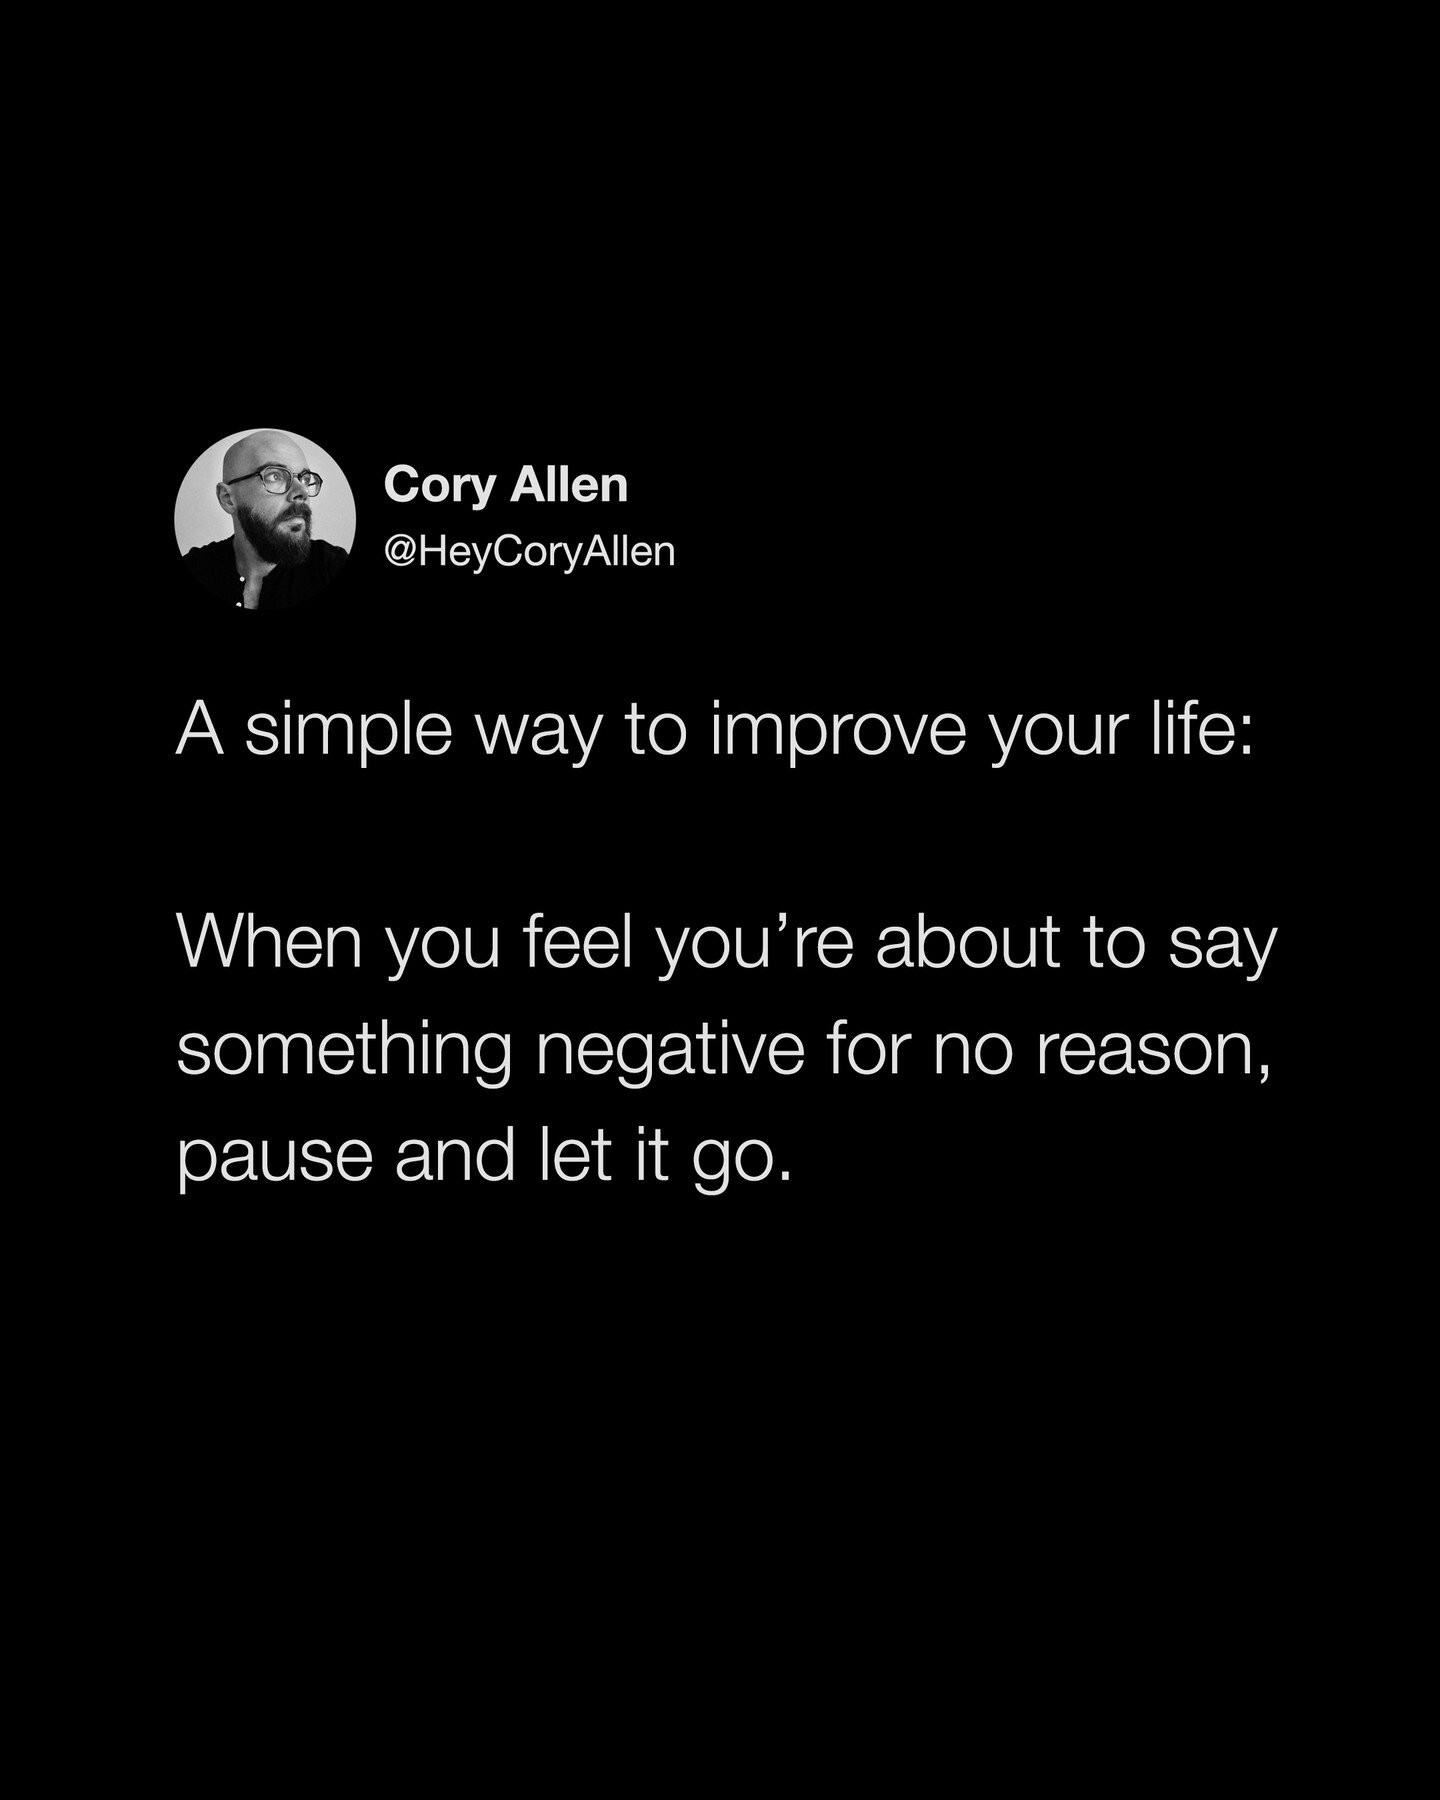 One day, you'll notice your mind stopped serving you negative thoughts because you stopped feeding them, and that your whole mindset has changed for the better.

A simple way to improve your life: when you feel you&rsquo;re about to say something neg